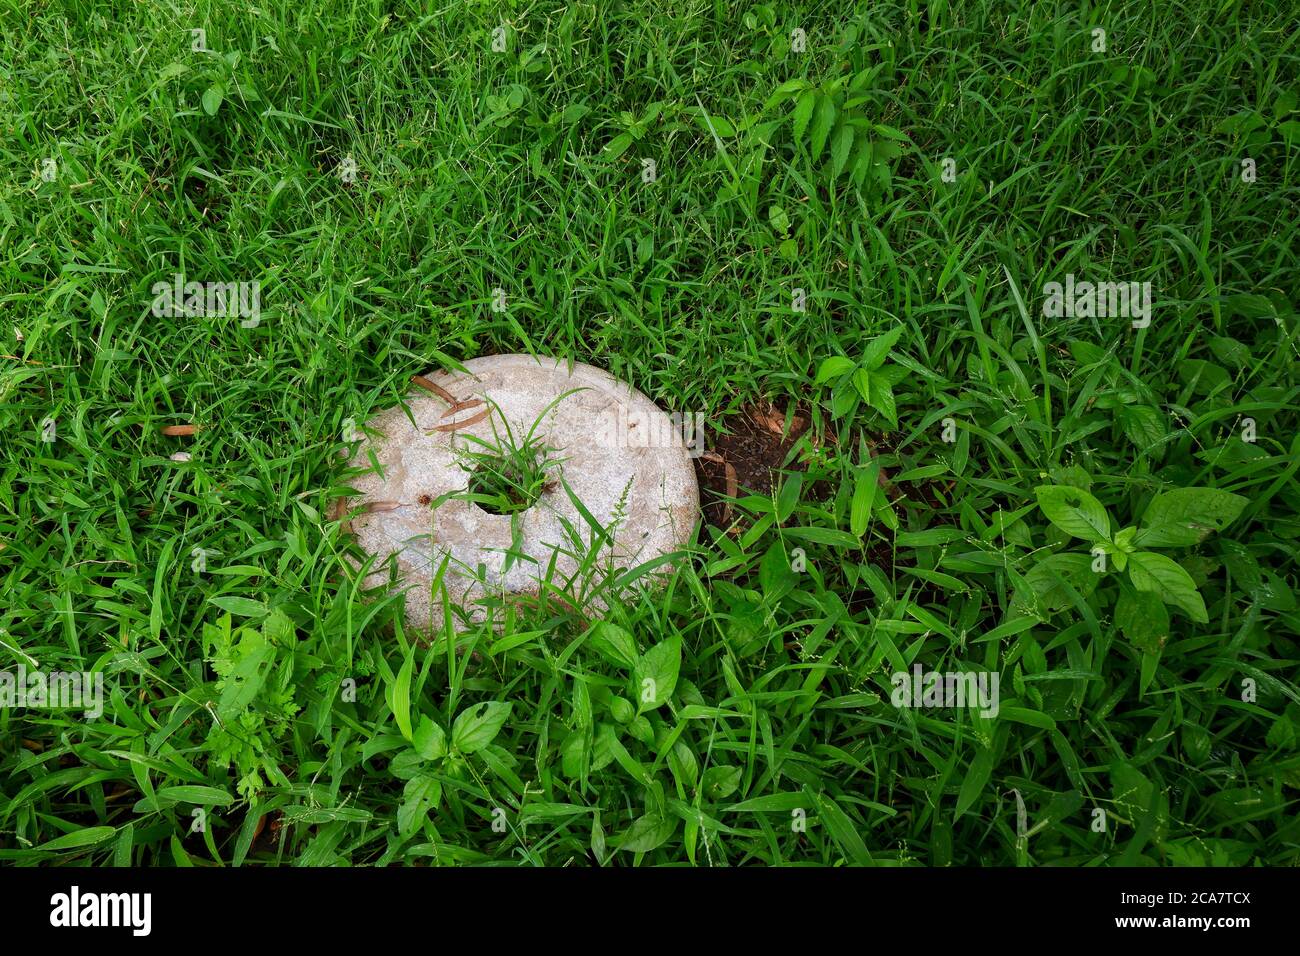 a close view of white round granite stone isolated on green grass in field Stock Photo